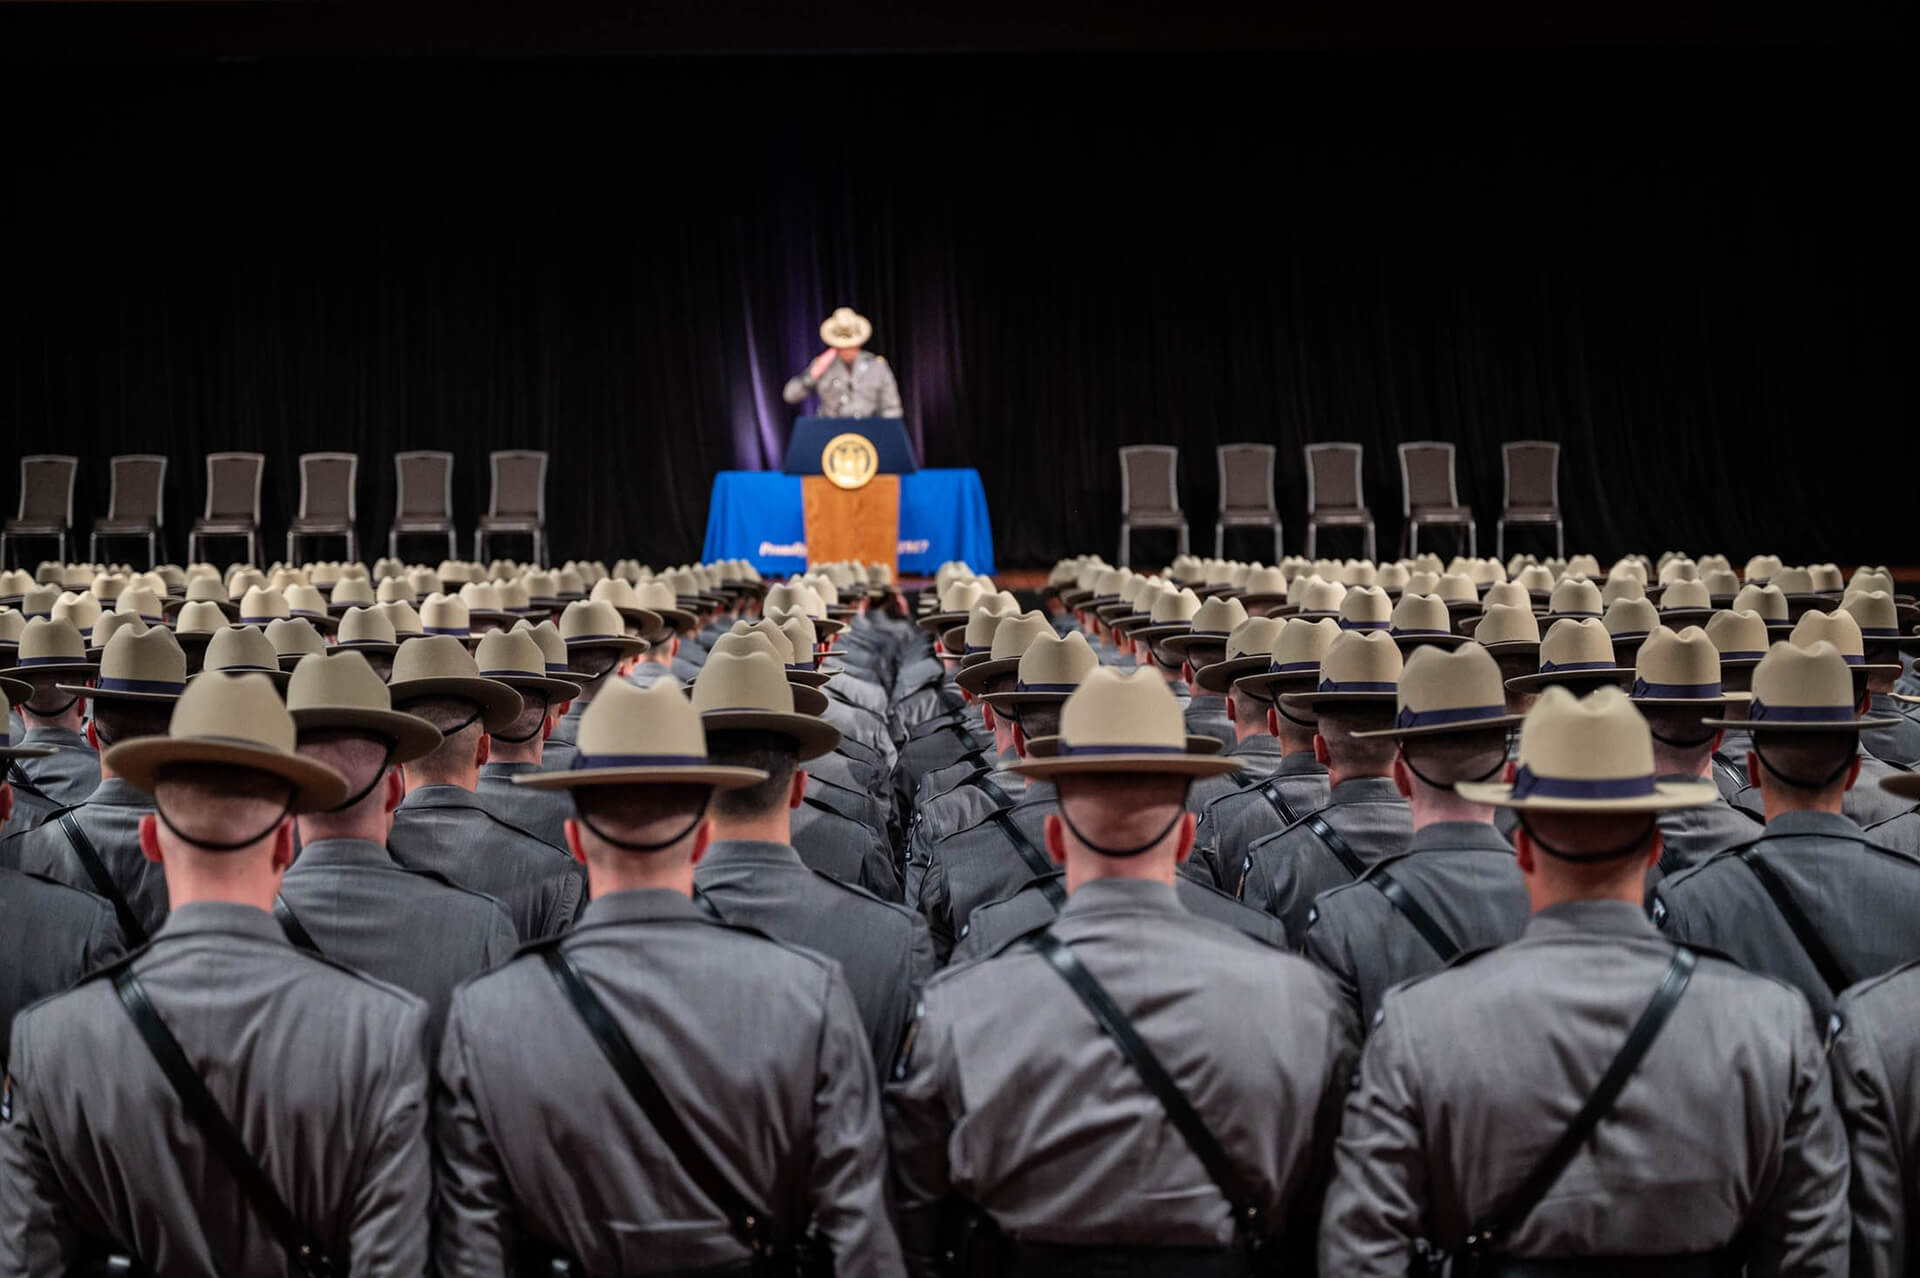 NY State Troopers standing in rows in front of a stage with an officer at the podium saluting